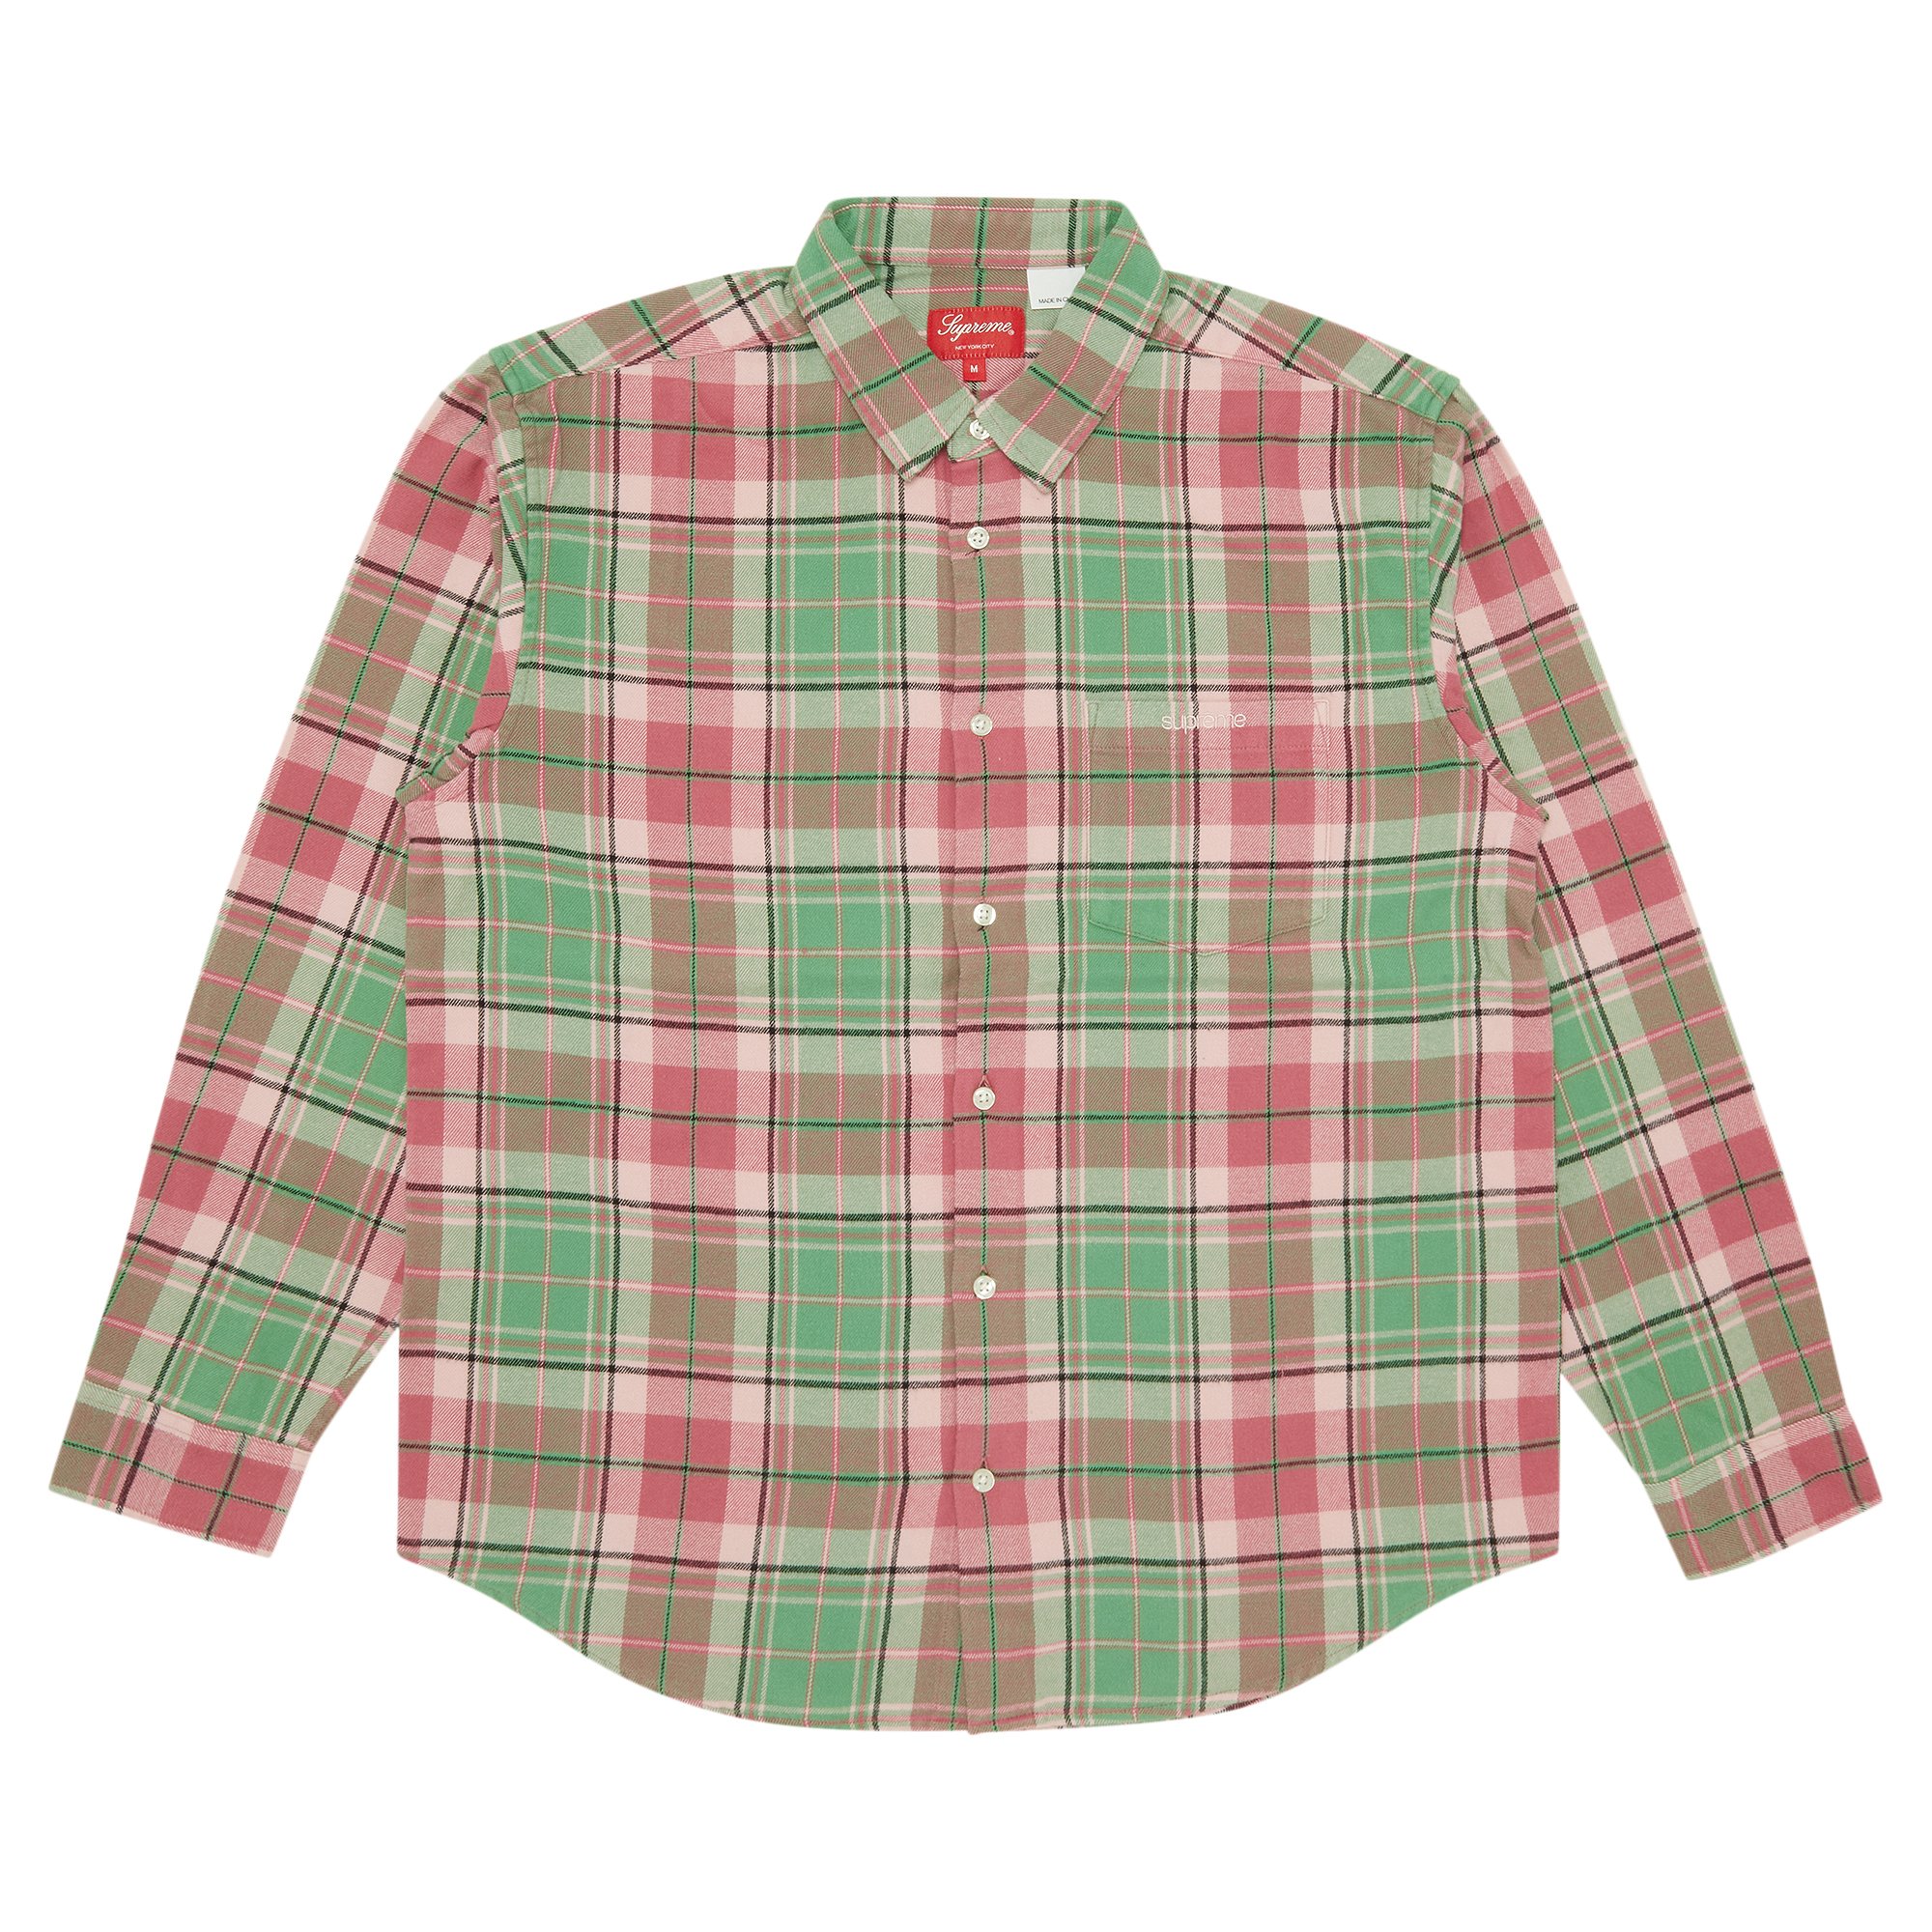 Buy Supreme Plaid Flannel Shirt 'Pink' - FW22S8 PINK | GOAT